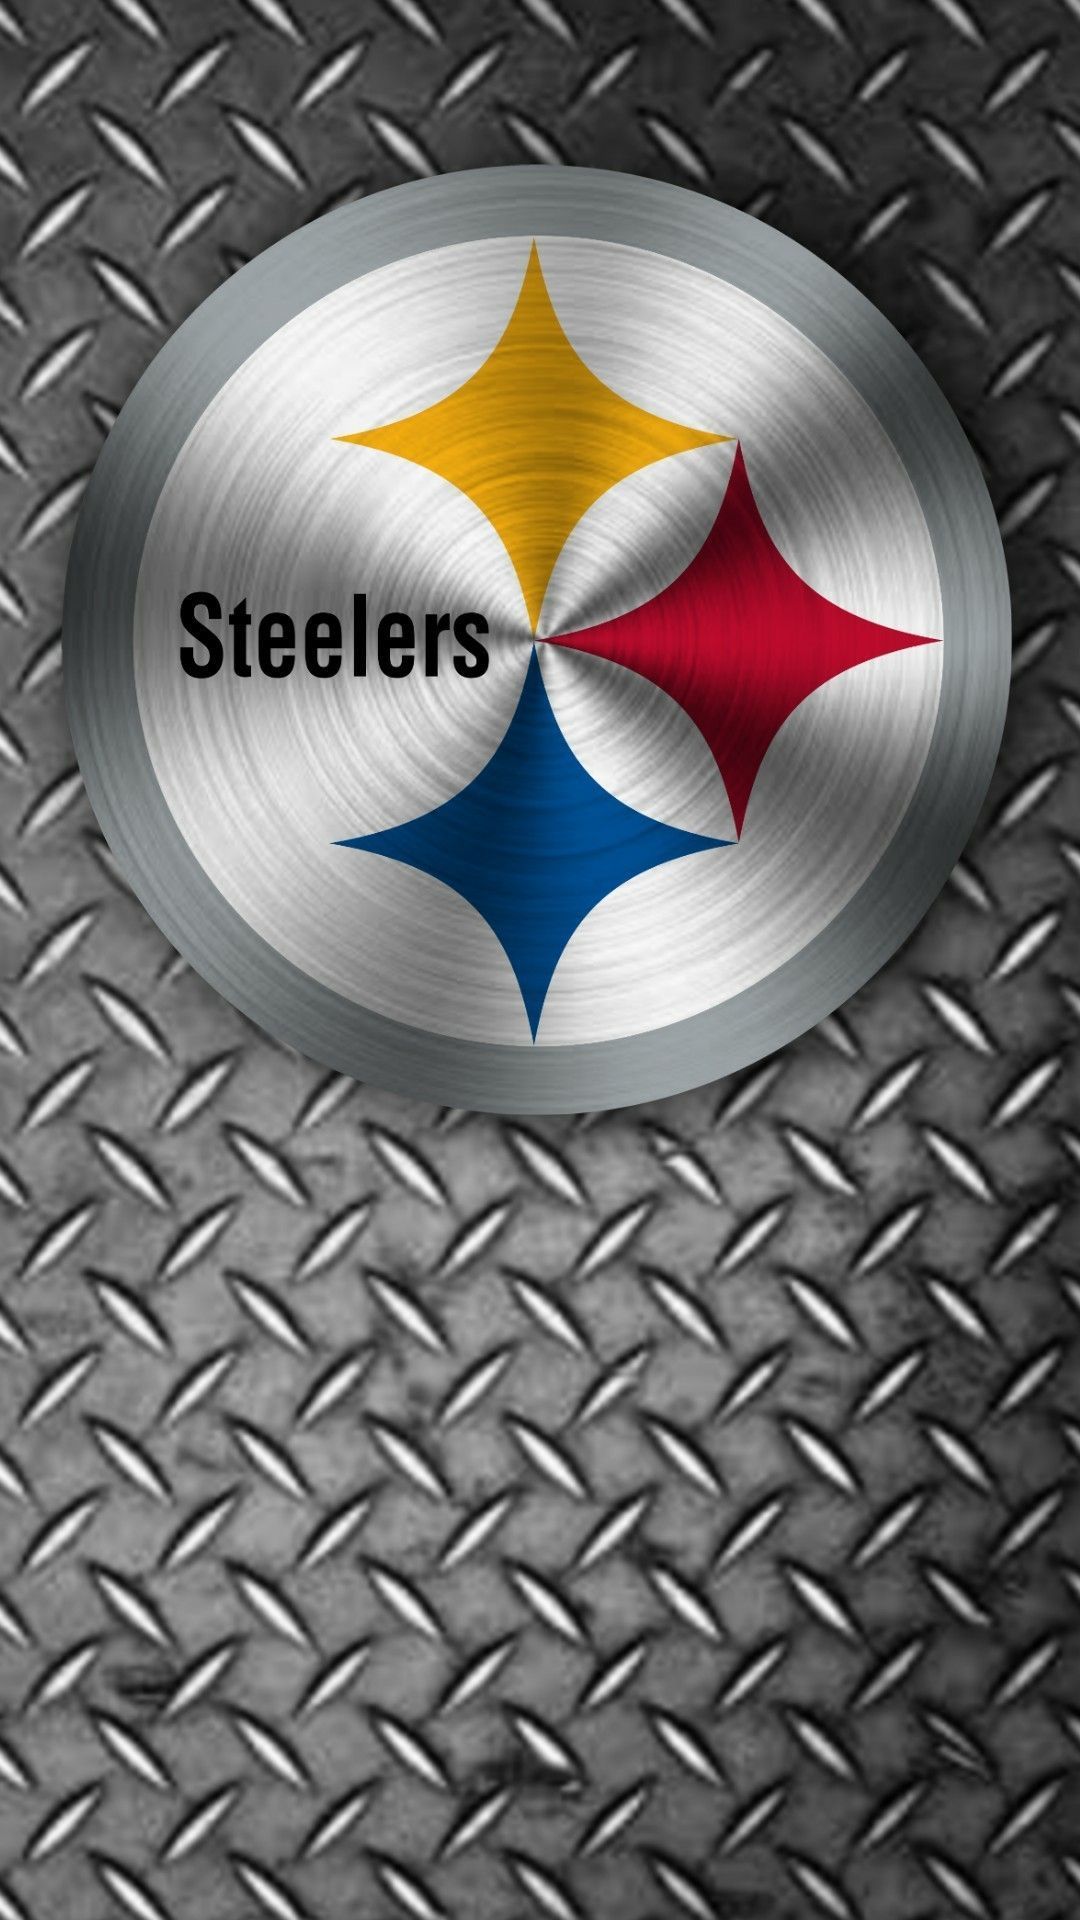 Pittsburgh Steelers Video Conferencing Background  Pittsburgh Steelers   Steelerscom